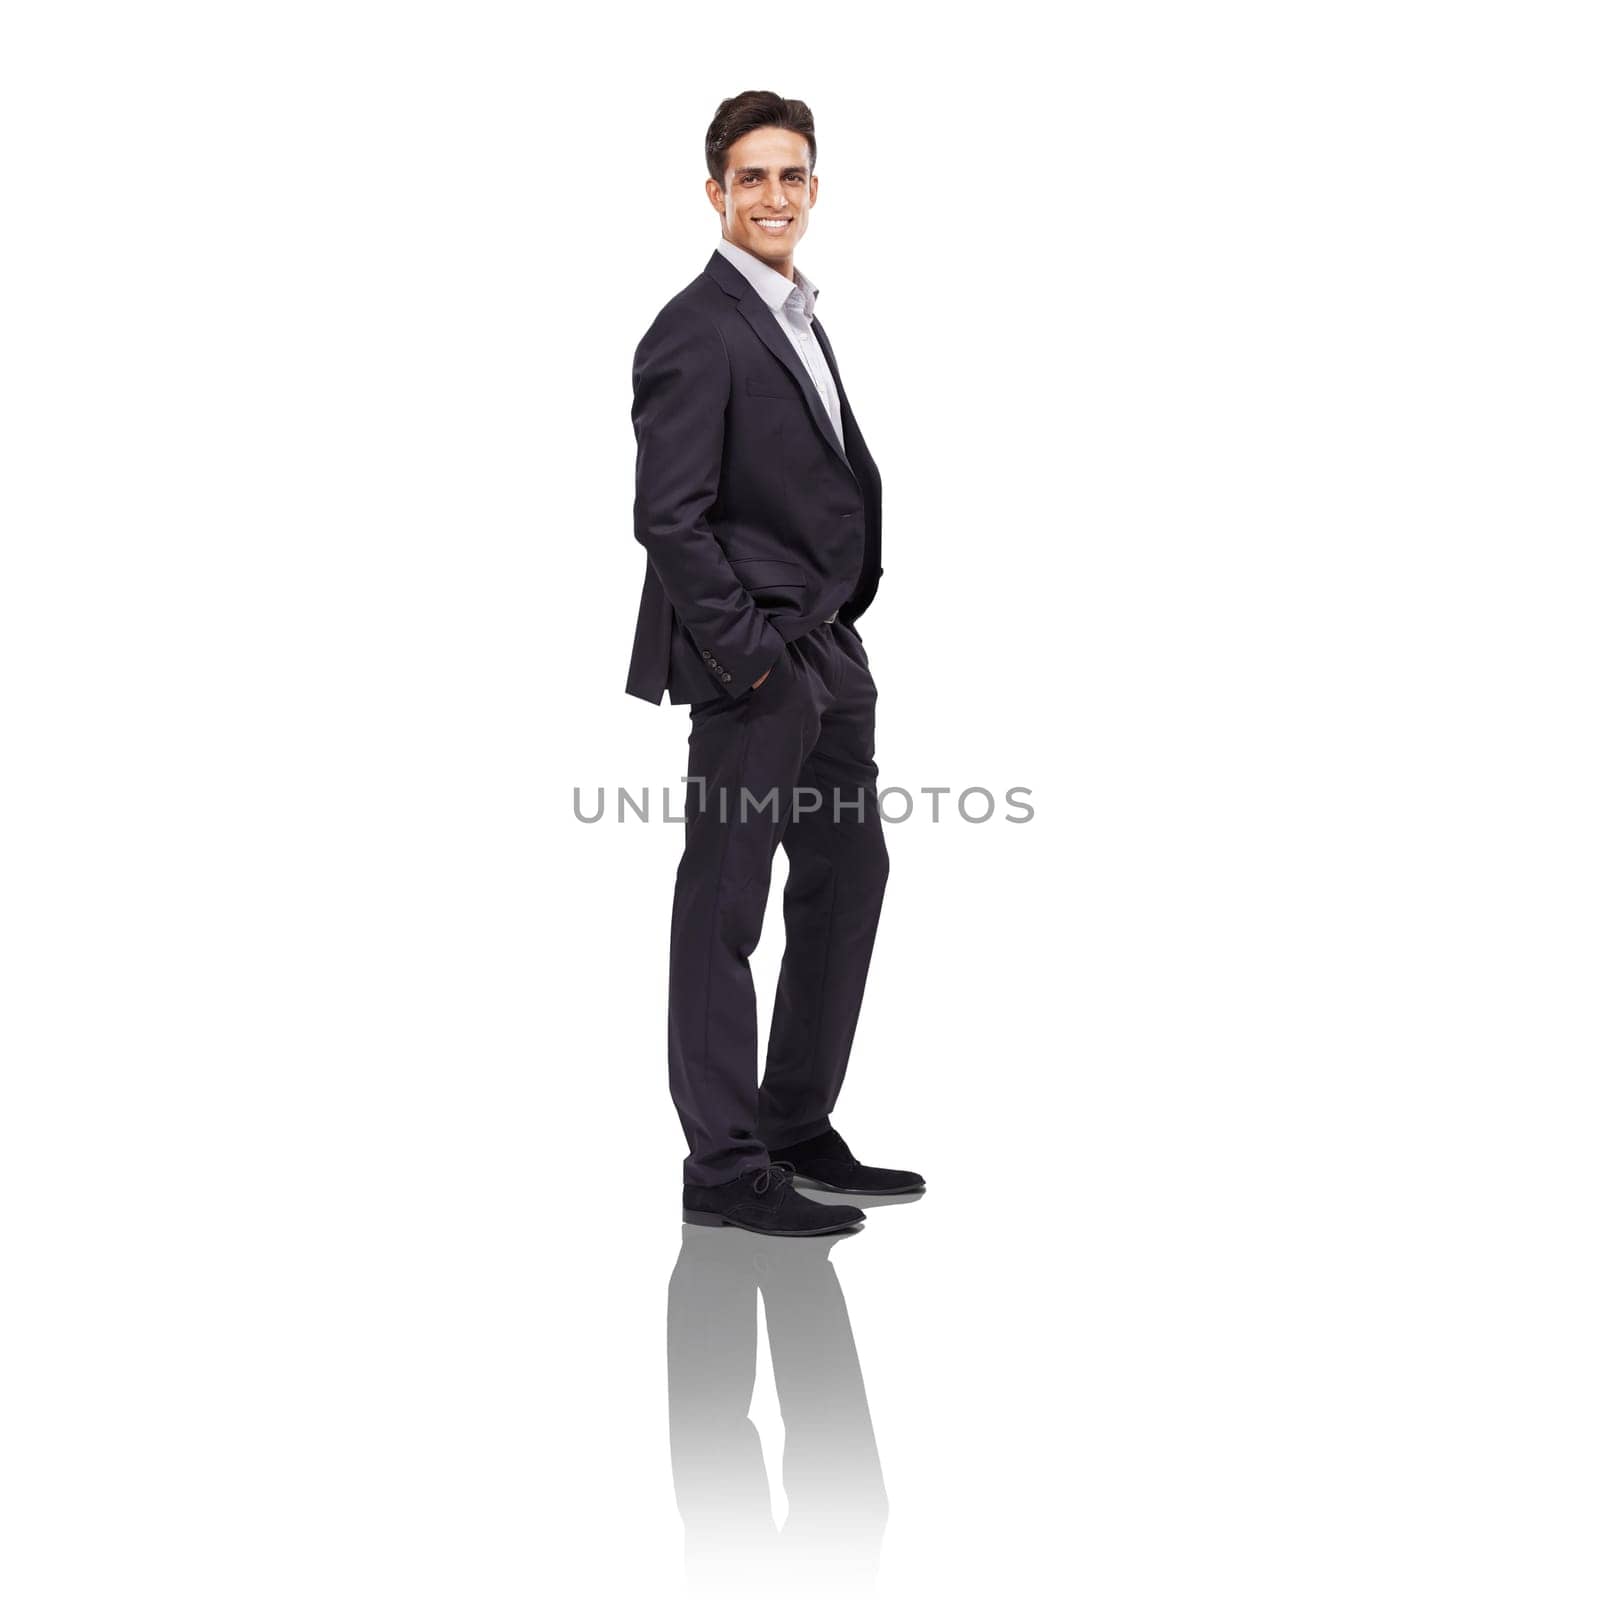 Suit, corporate fashion for business and an Indian man looking confident and professional on a png, transparent and isolated or mockup background. Portrait of a handsome executive or CEO by YuriArcurs